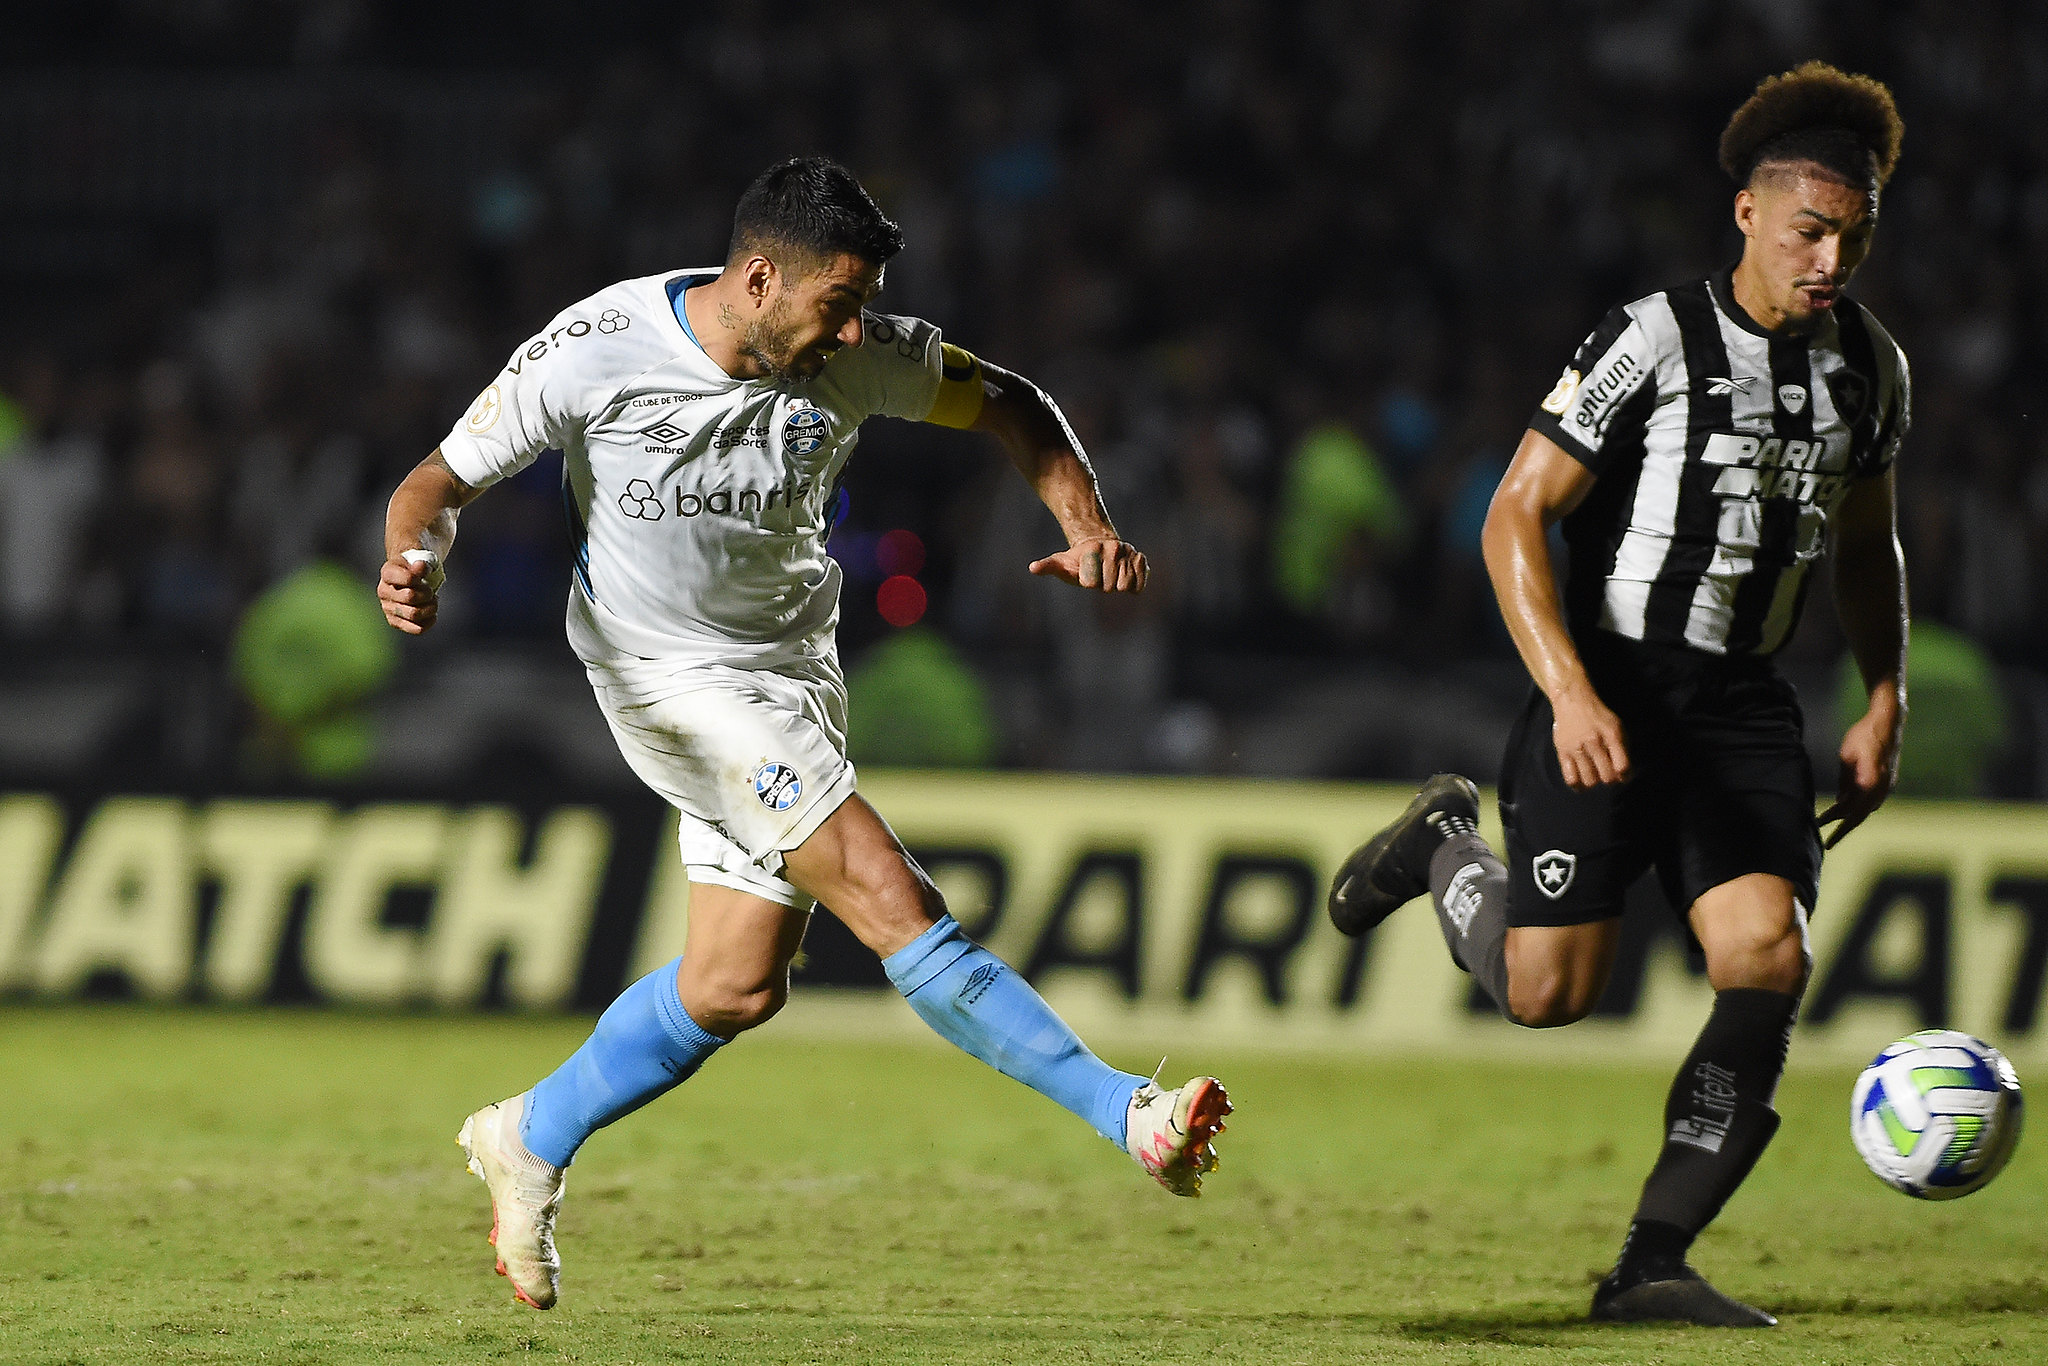 Gremio vs Brusque: An Exciting Clash of Football Giants